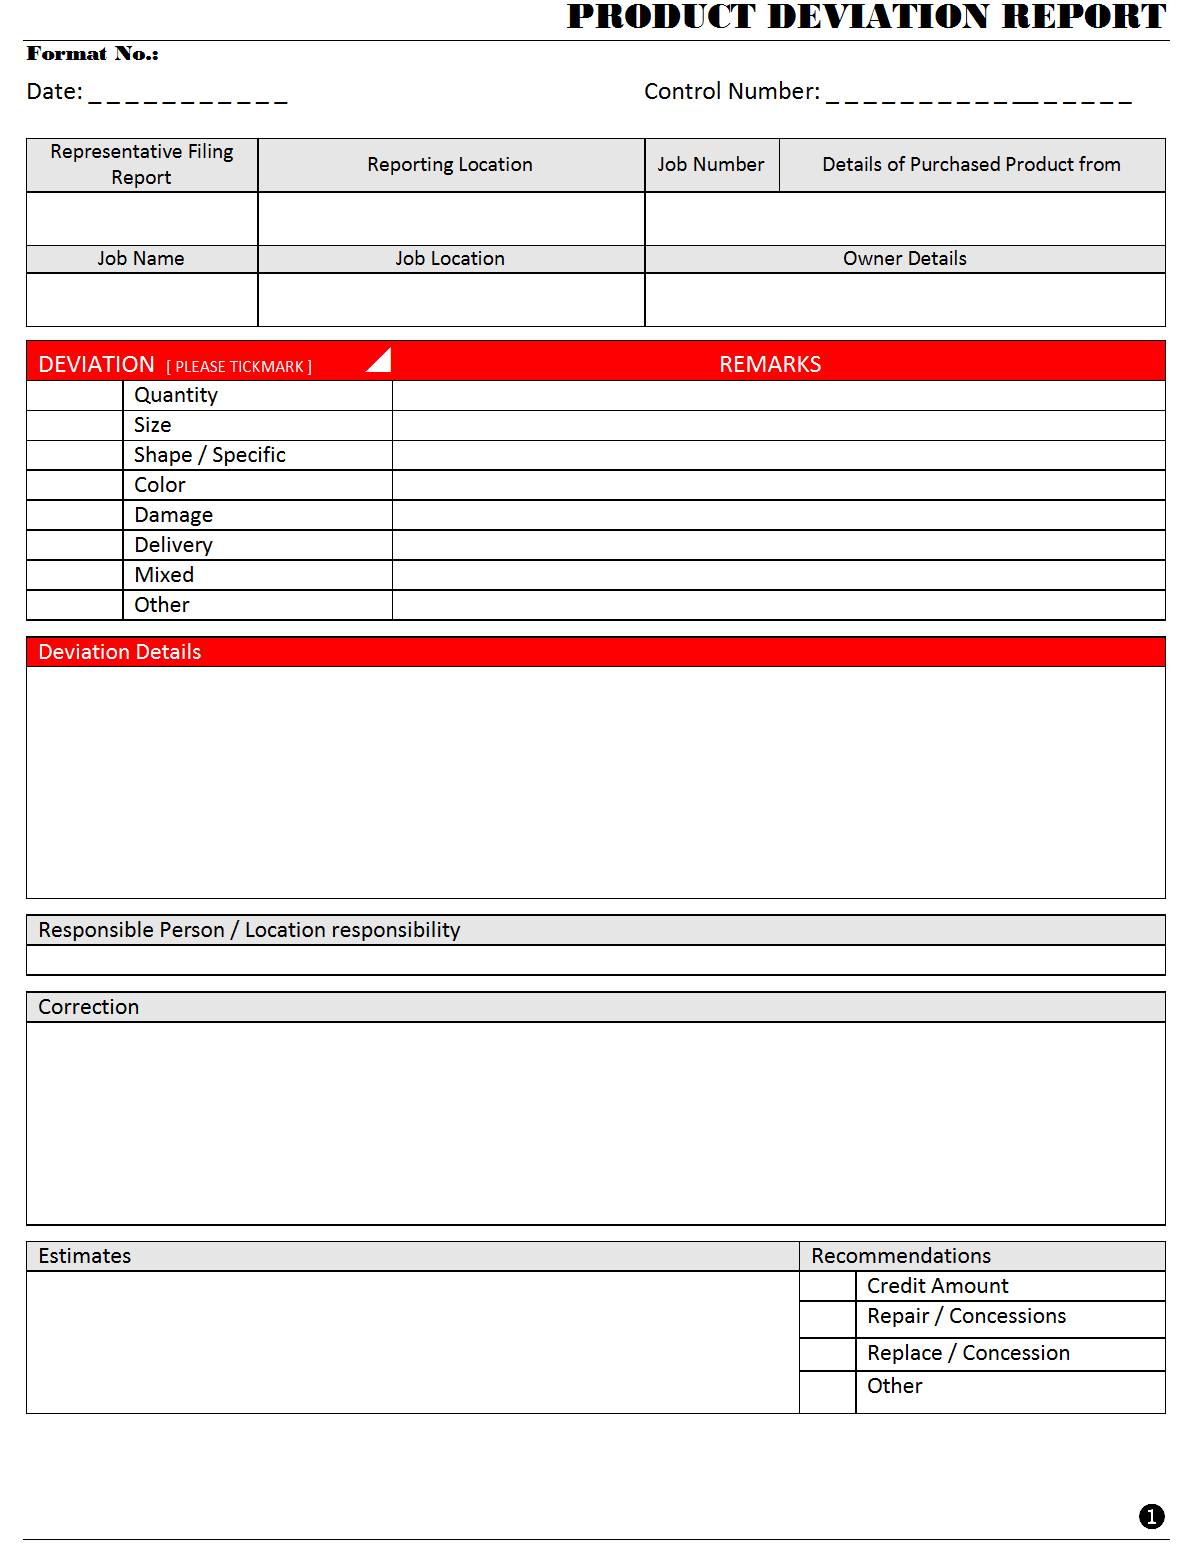 Product Deviation Report Format  Samples  Excel Document  Pertaining To Deviation Report Template